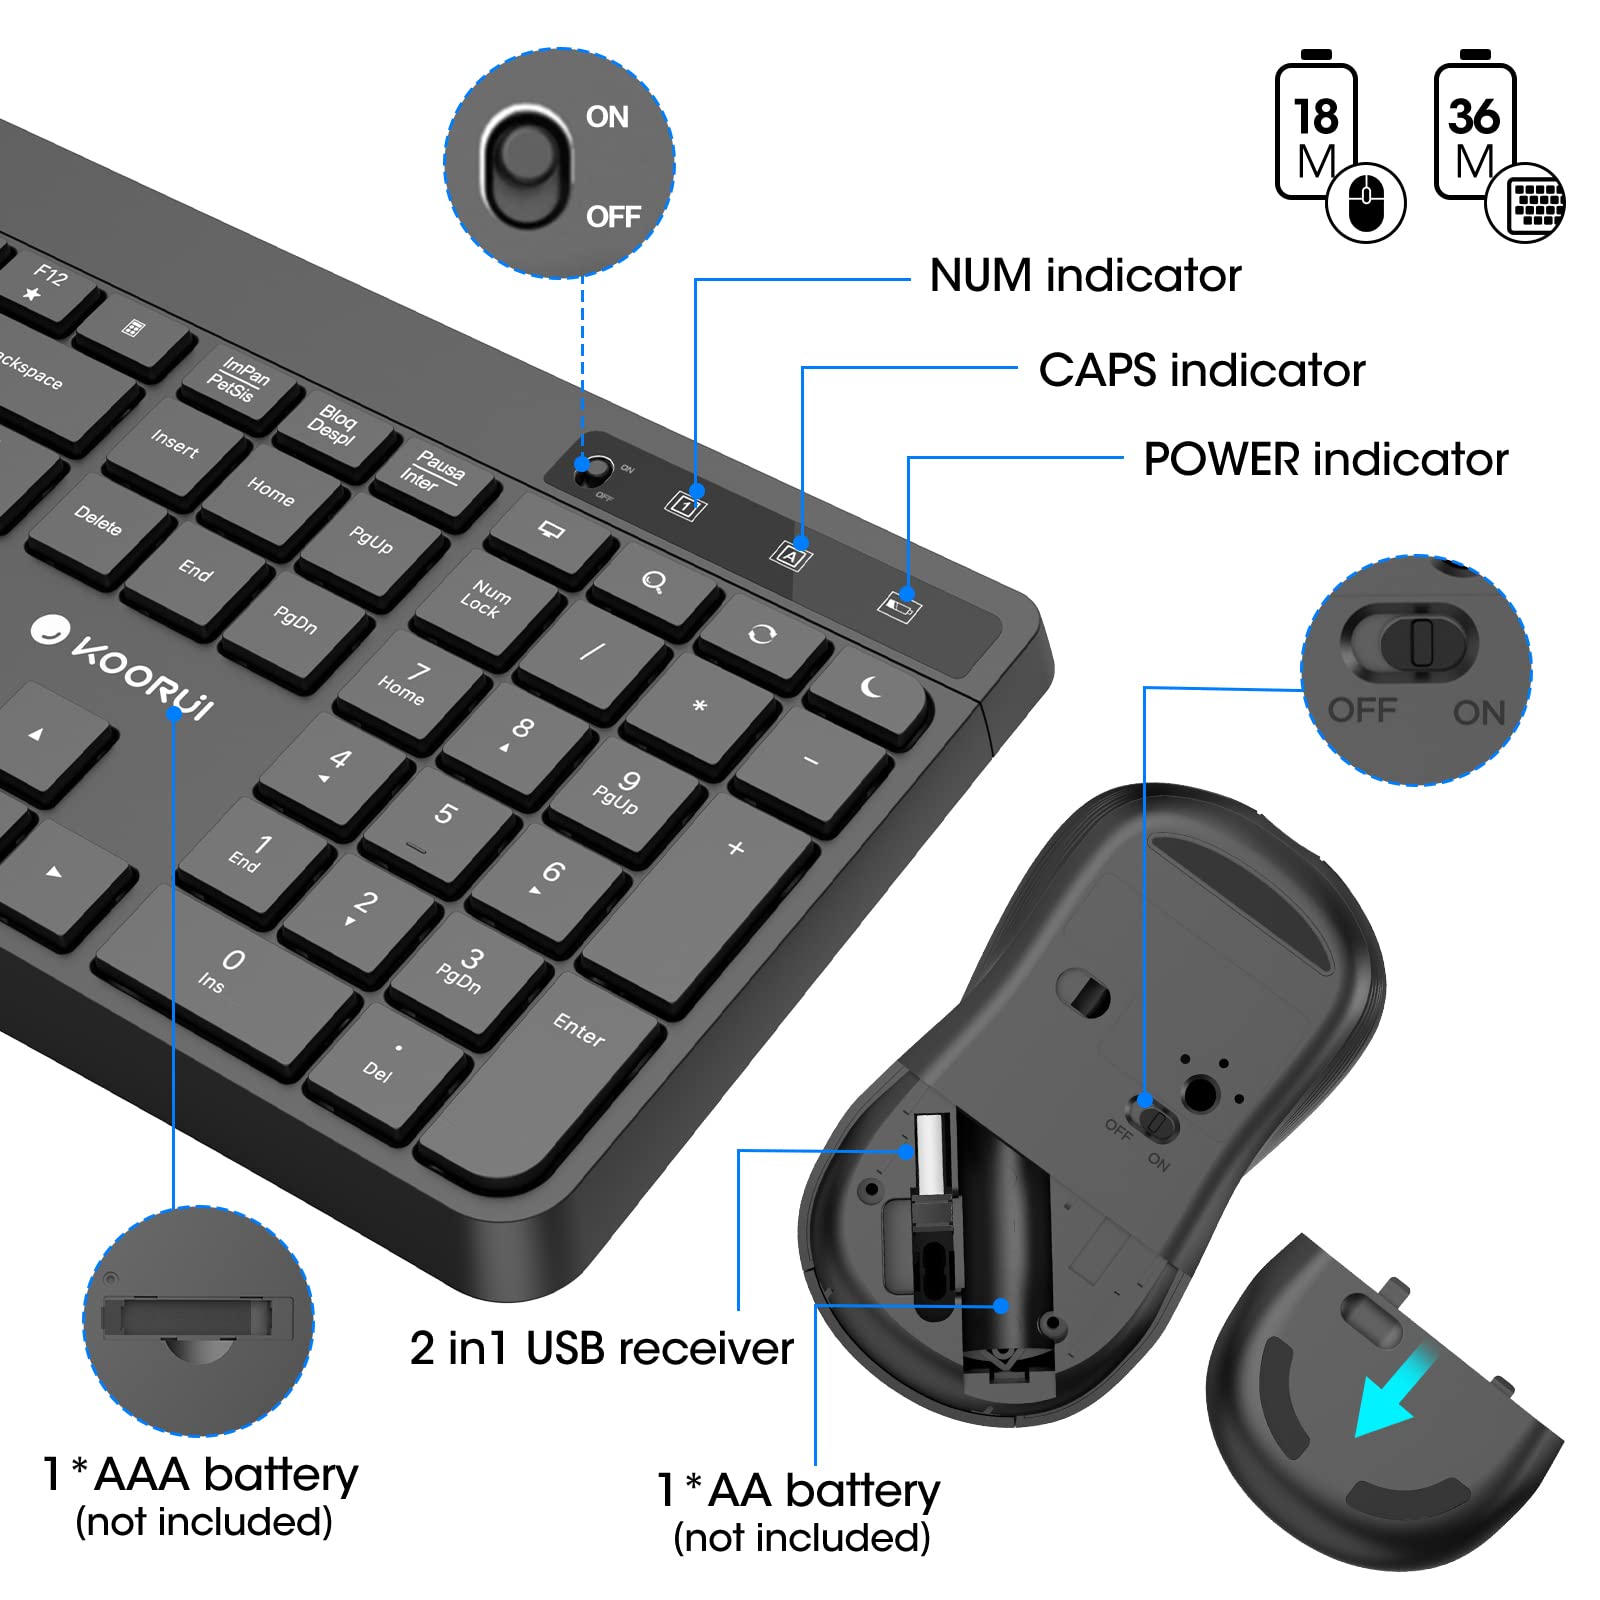 KOORUI Wireless Keyboard and Mouse Combos, 2.4G Silent Full Size Keyboard 3DPI Mouse for Windows MacOS Linux, 12 Multimedia and Shortcut Keys Desktop Computer/Laptop/PC-Black (Battery Not Included)